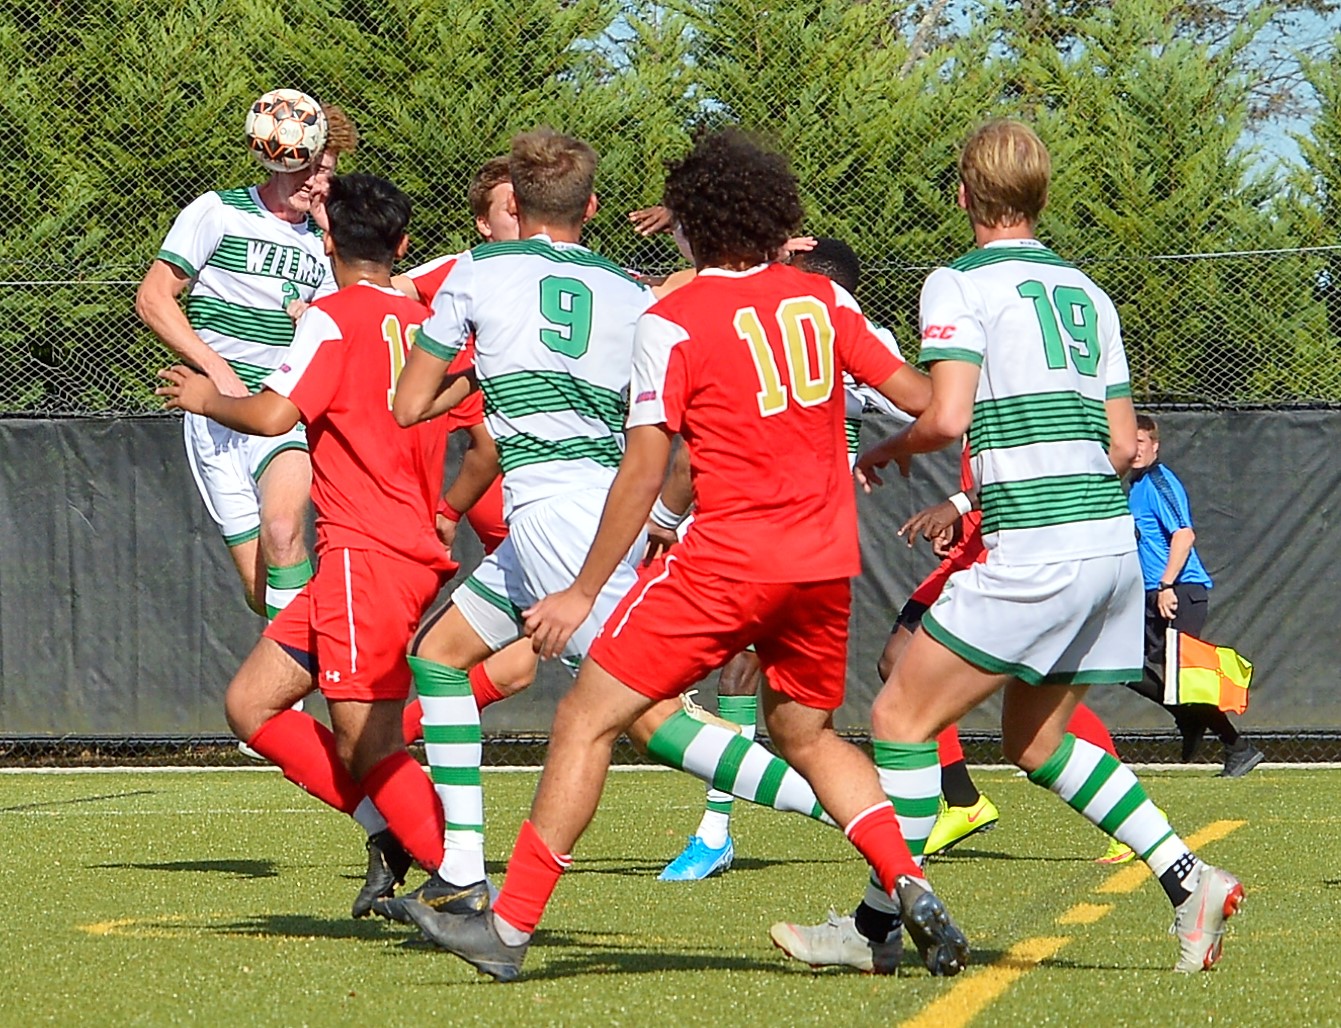 Photo of Joe Bell scoring against Caldwell. Copyright 2019; Wilmington University. All rights reserved. Photo by James Jones. October 19, 2019 vs. Caldwell.